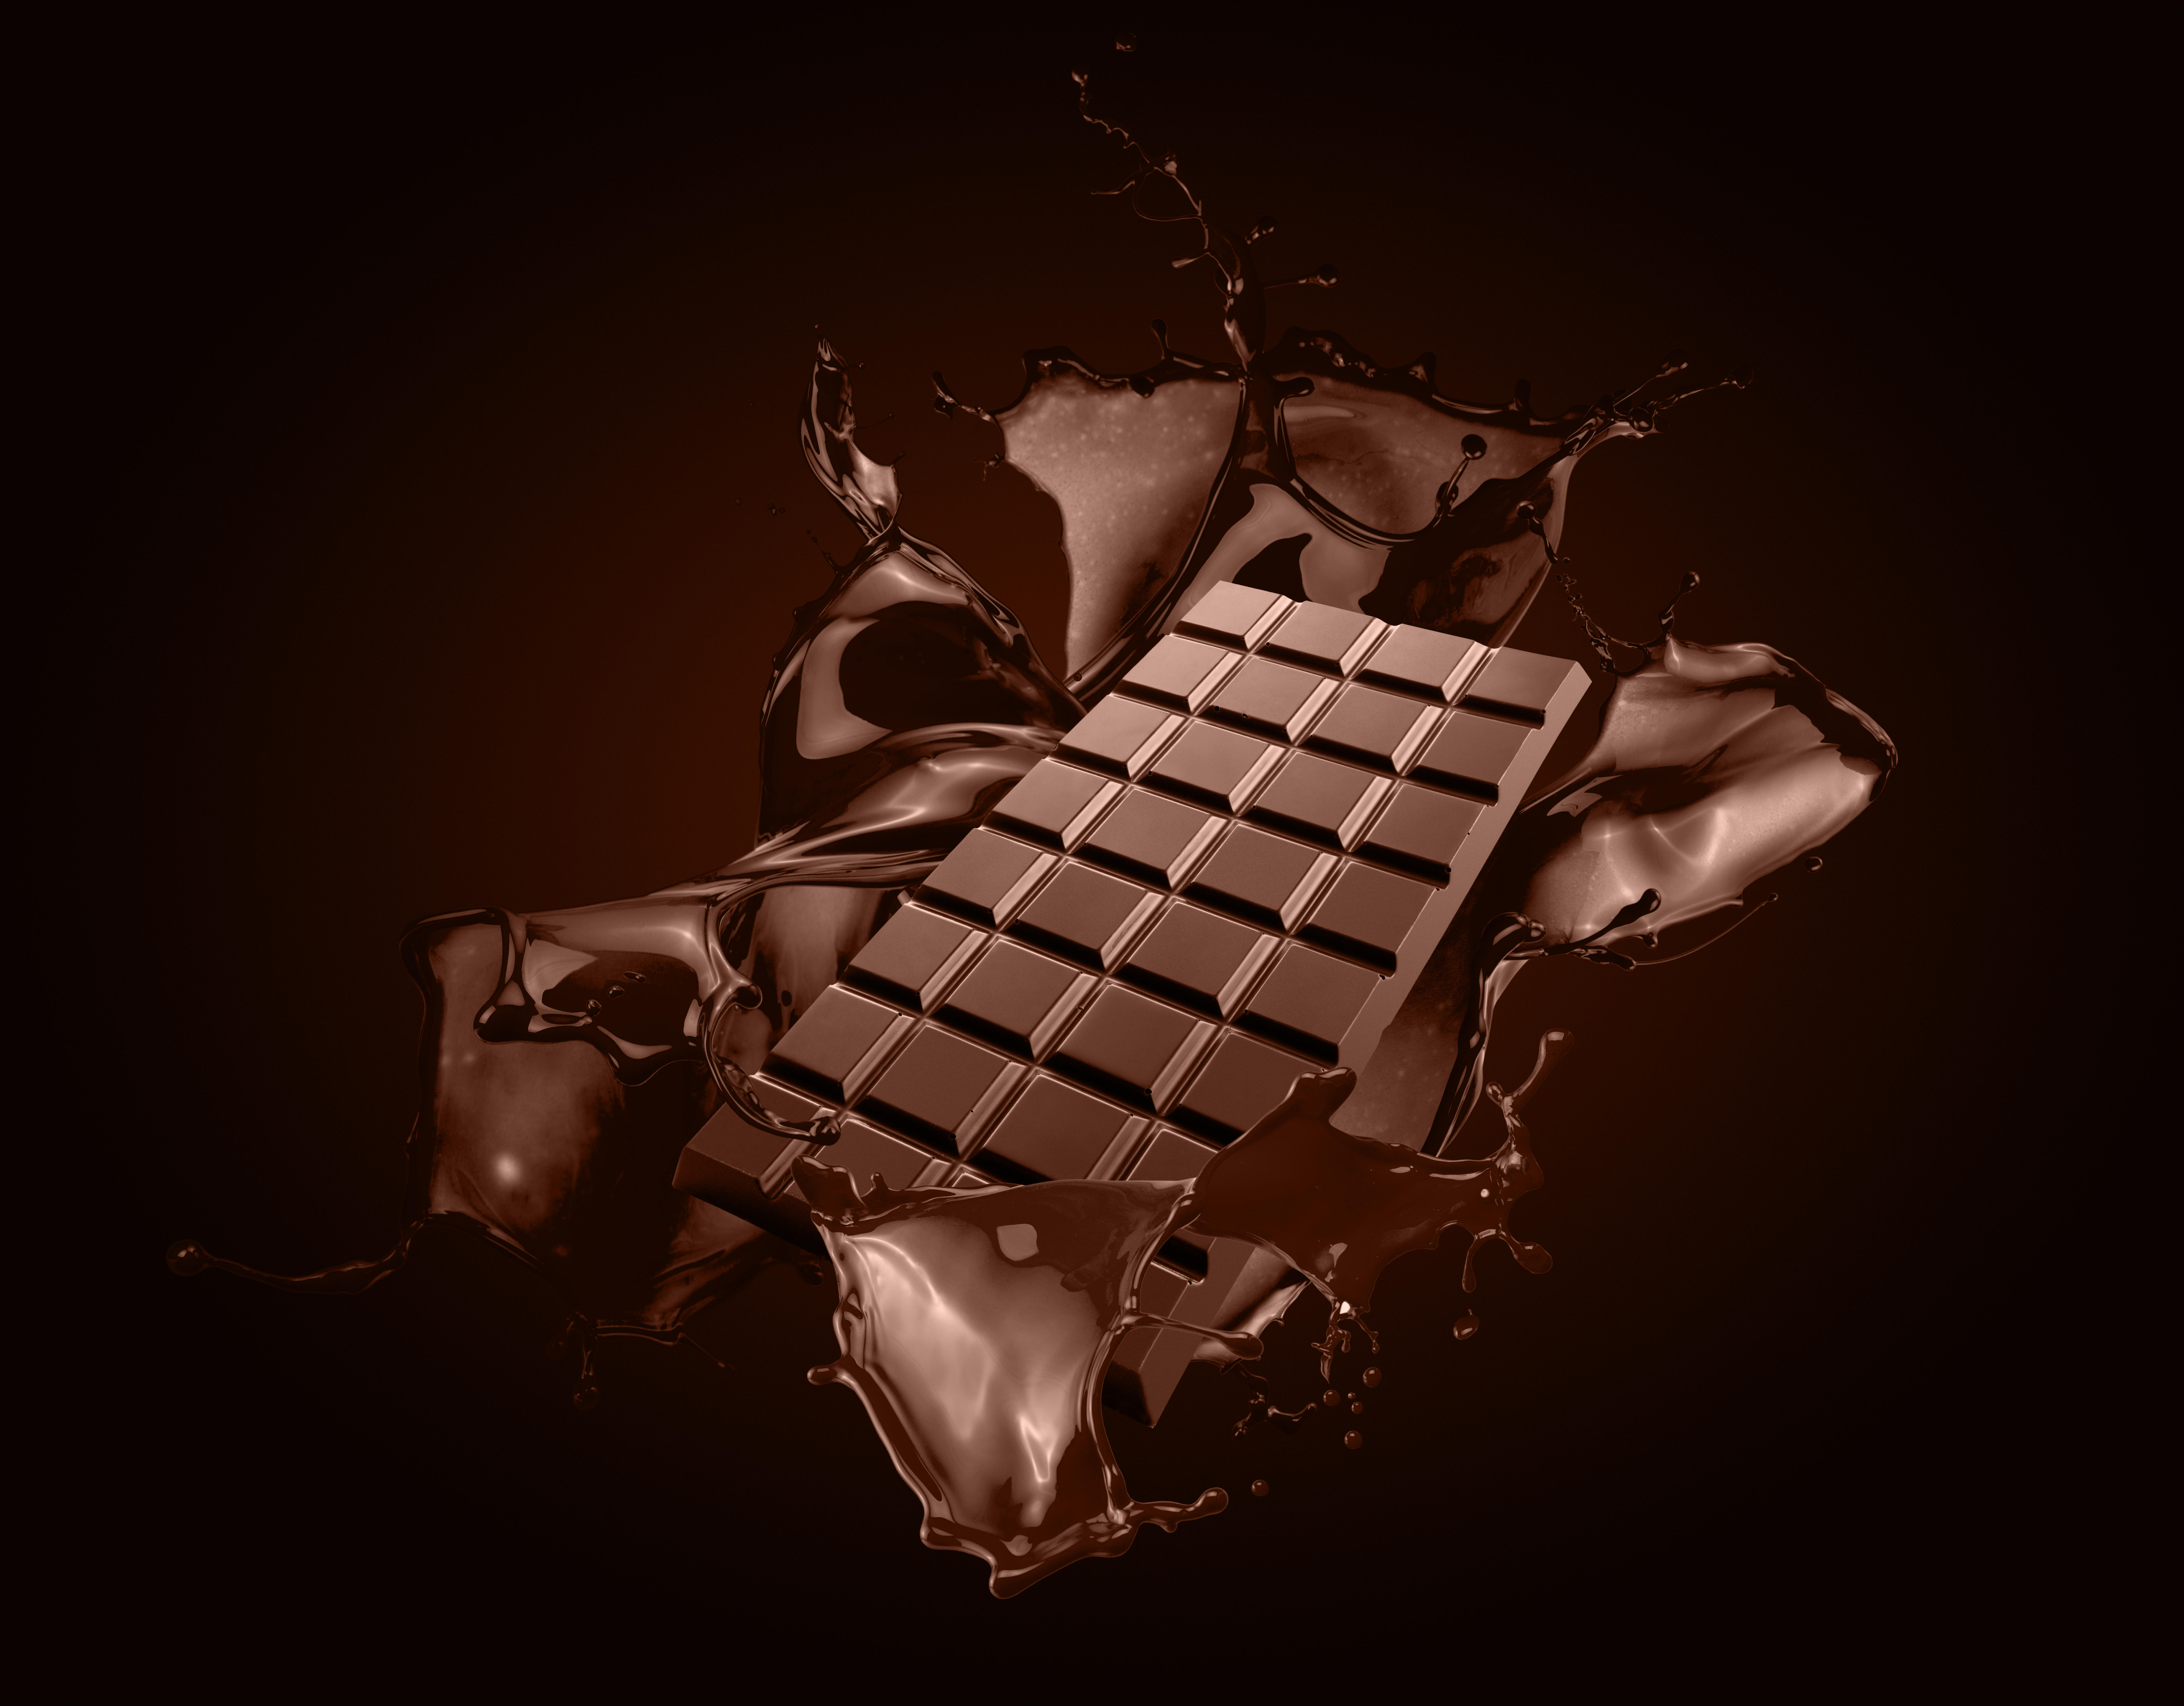 Wallpapers splashes chocolate chocolate bar on the desktop